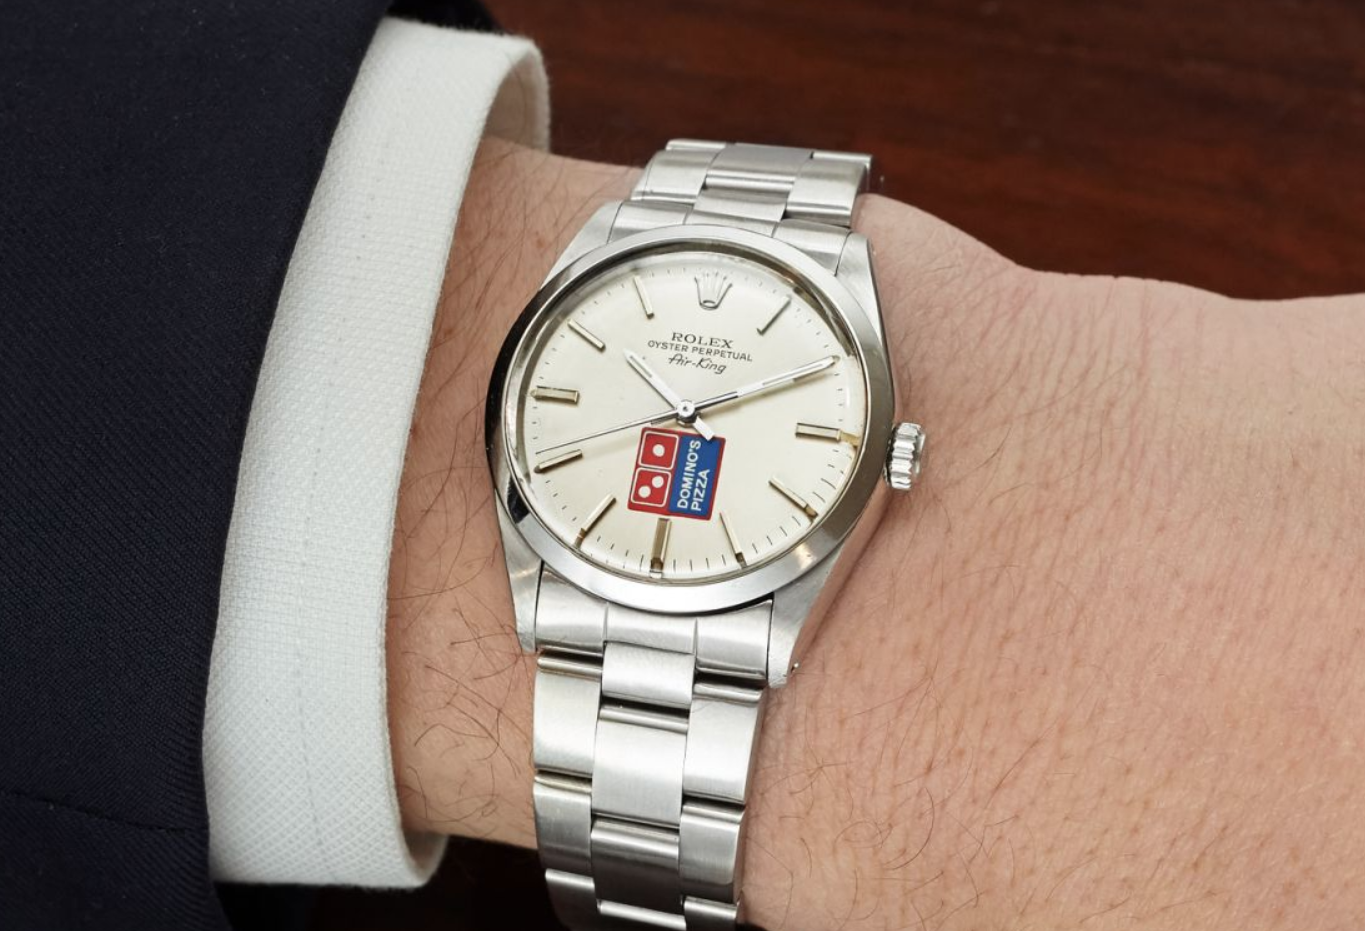 rolex air king domino's pizza